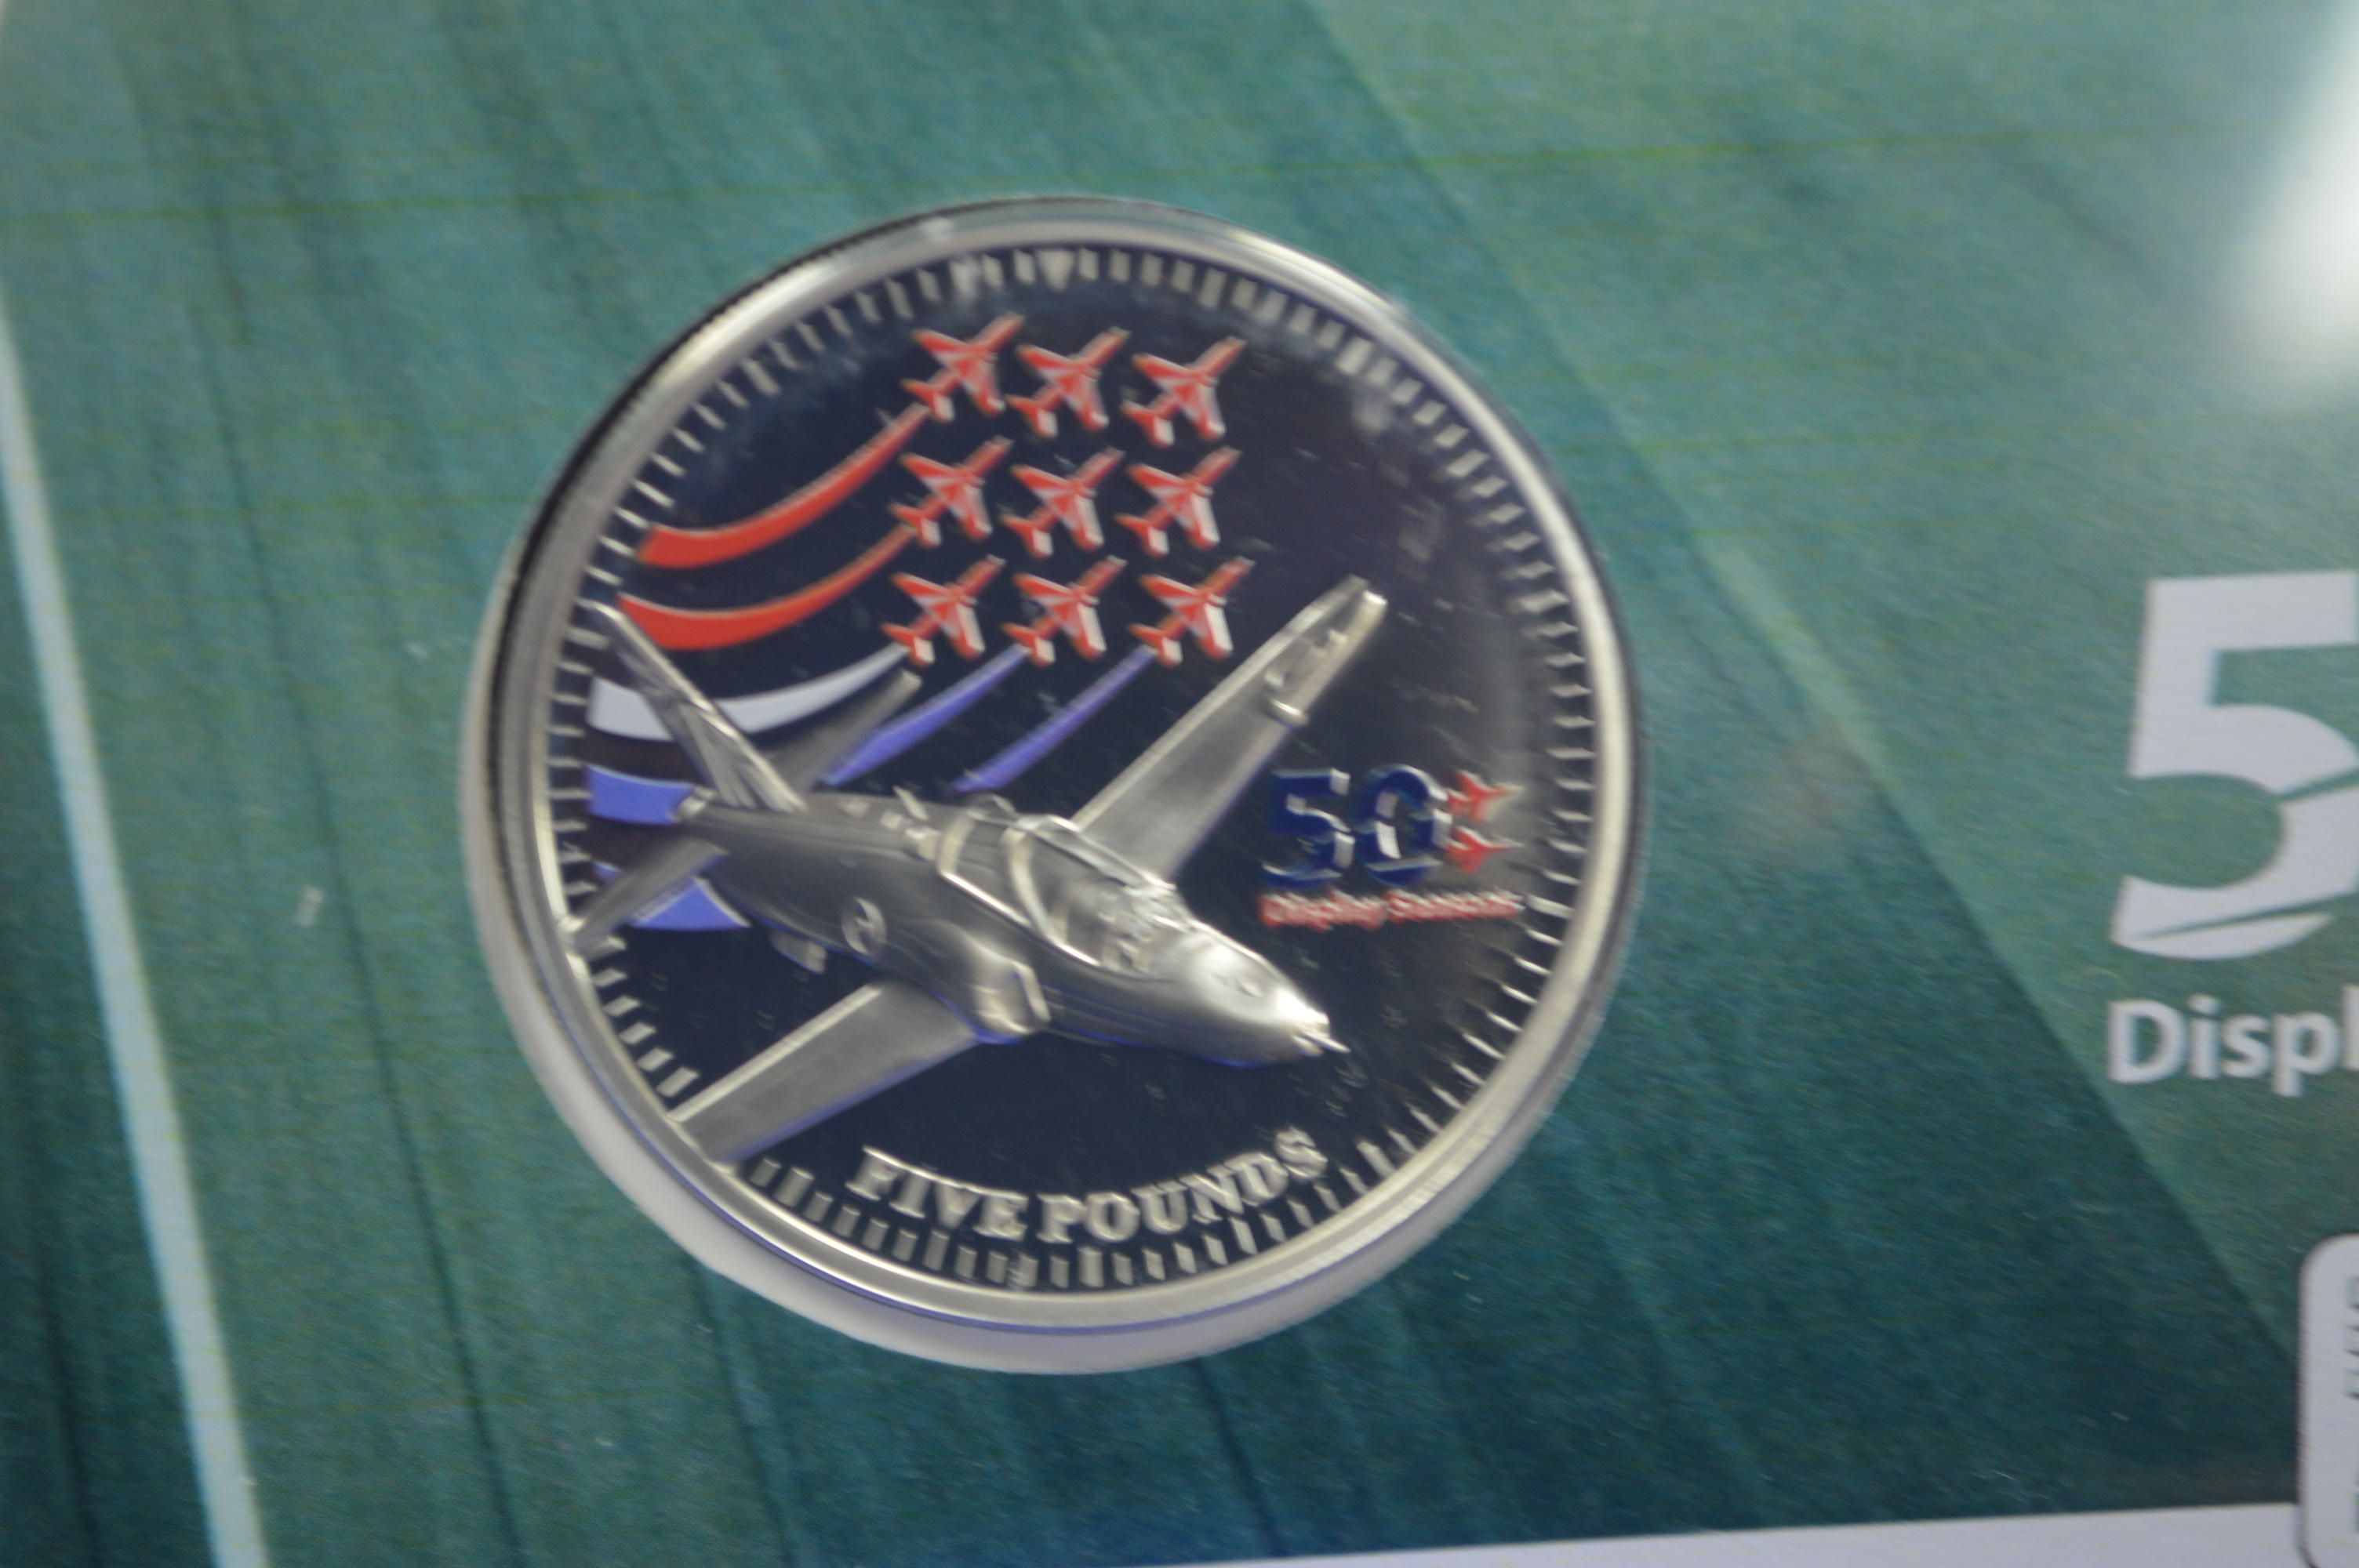 Westminster Red Arrows 50th Display Season Silver Proof £5 Coin Cover - Image 2 of 2